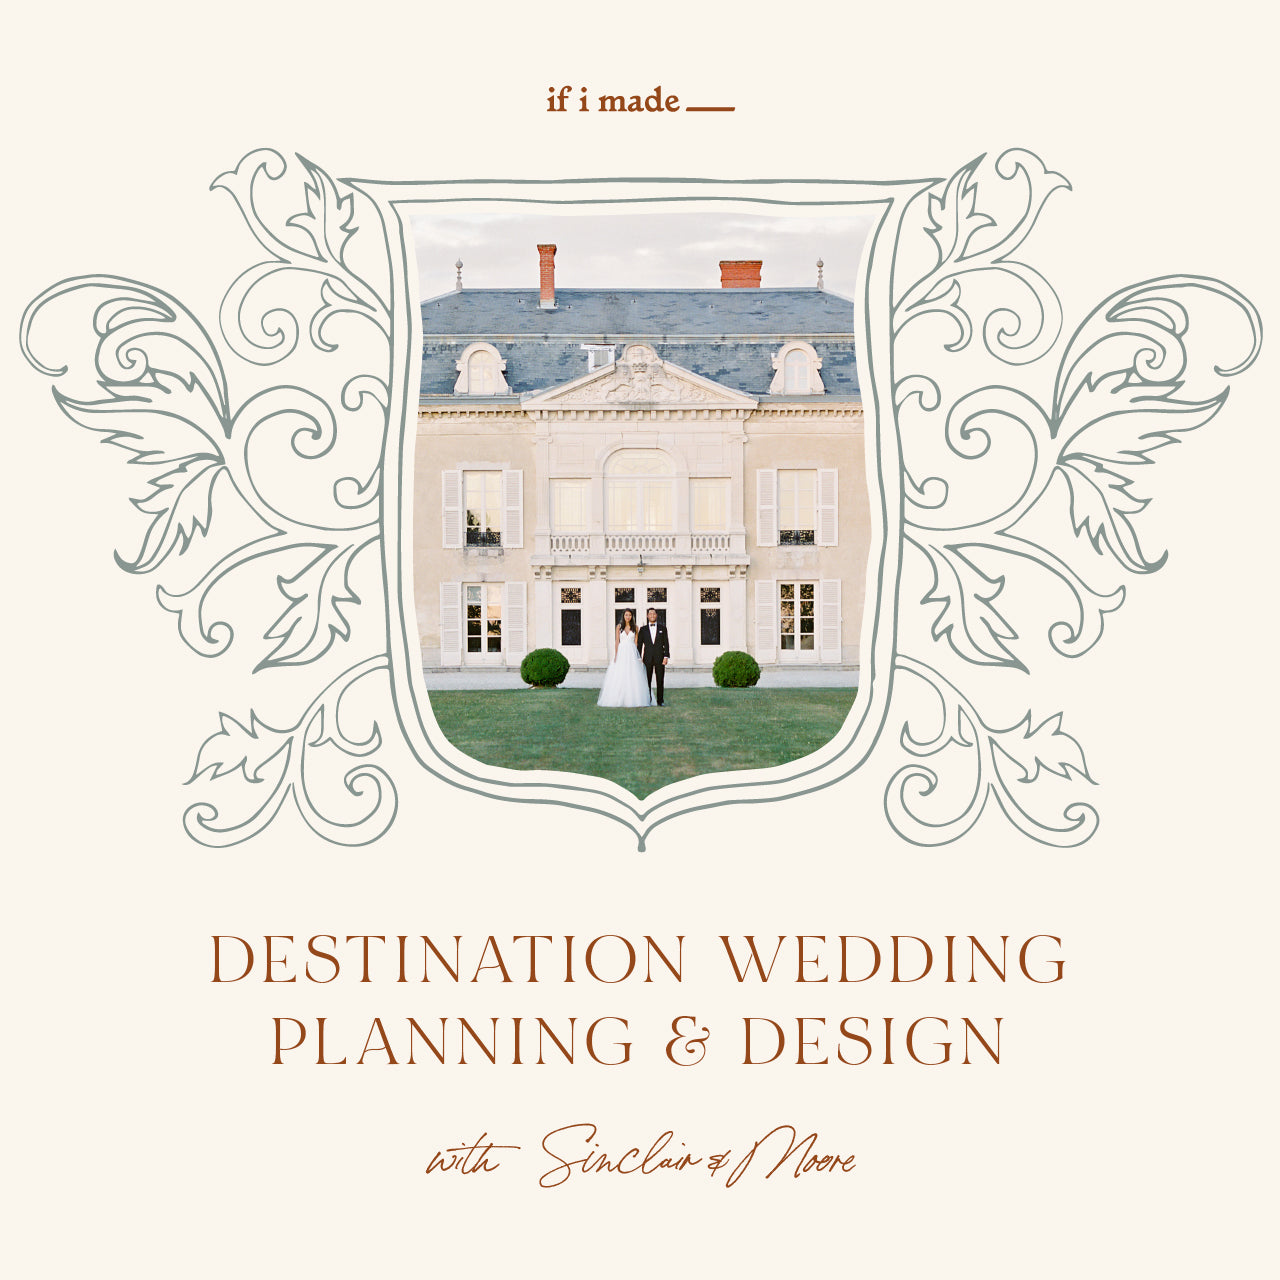 Destination Wedding Planning & Design with Sinclair & Moore (RPP) - 30 payments of $99